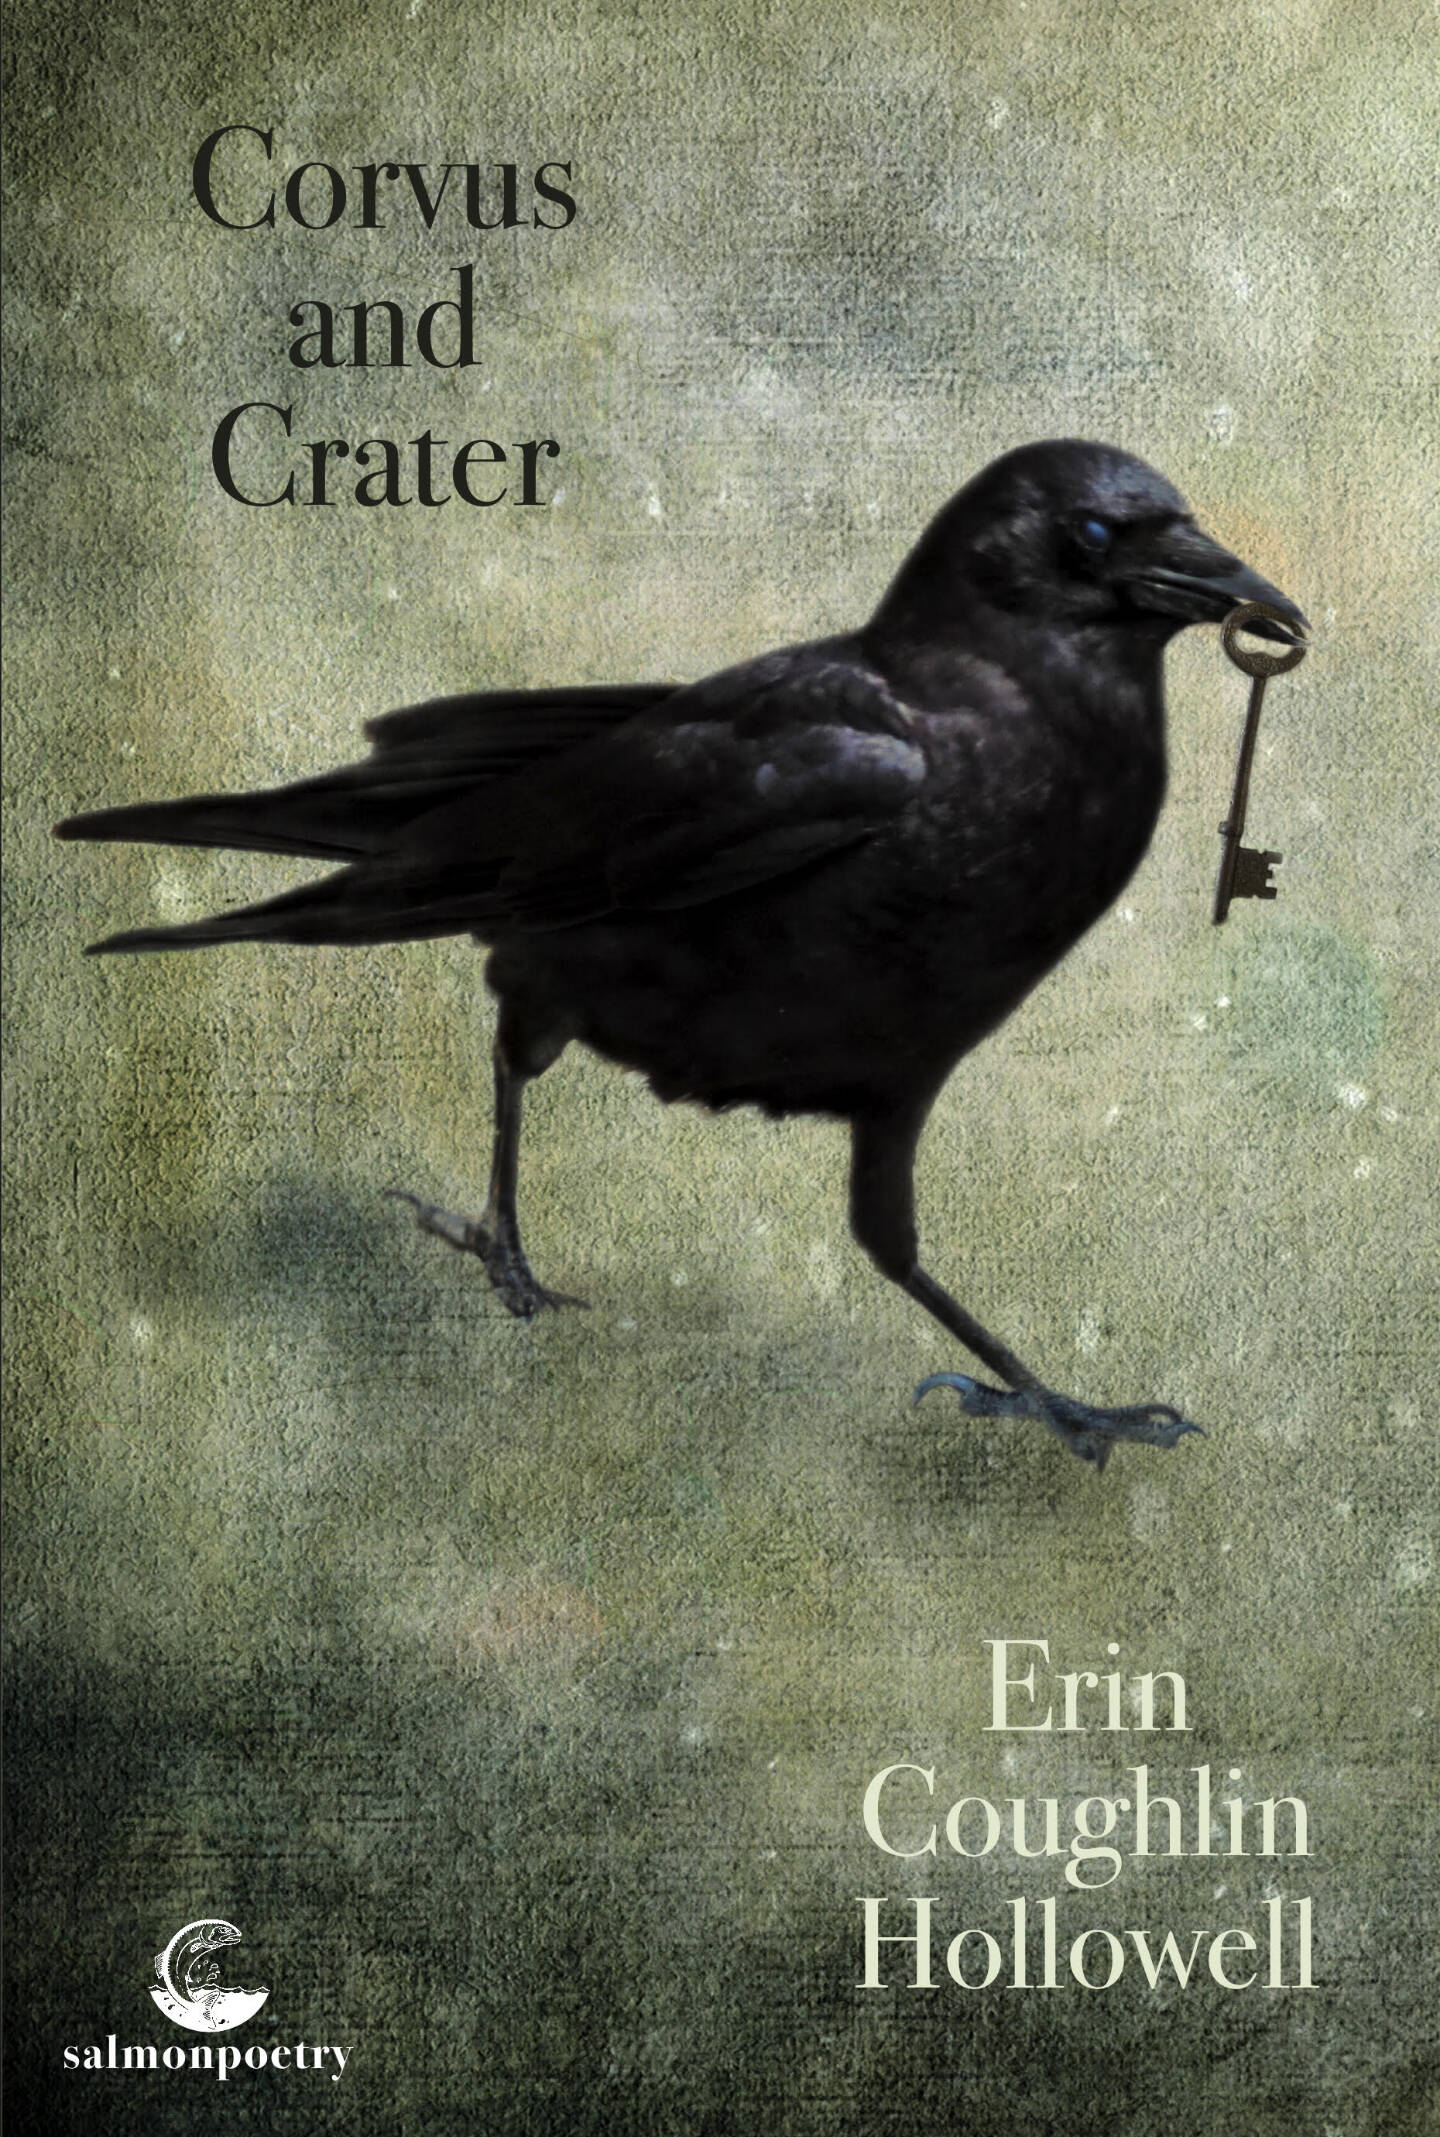 Cover artwork of Erin Coughlin Hollowell’s latest poetry collection. Photo provided by Erin Hollowell